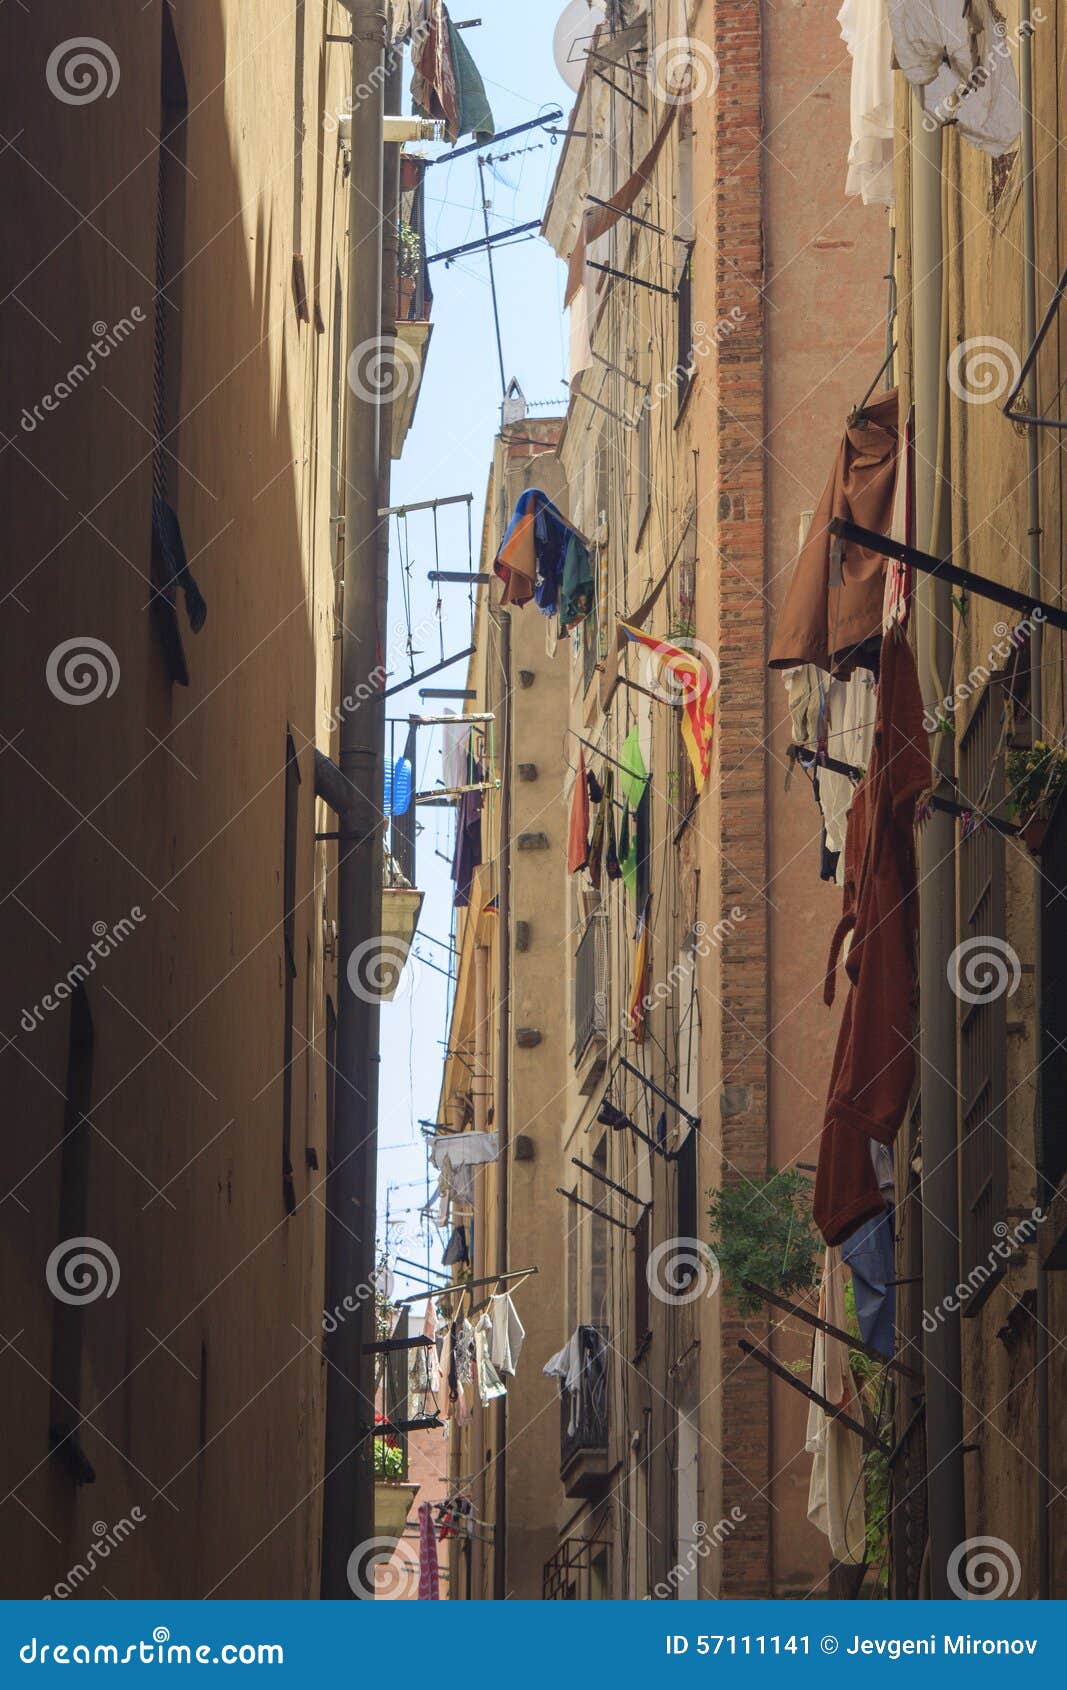 drying clothes on the upper floors